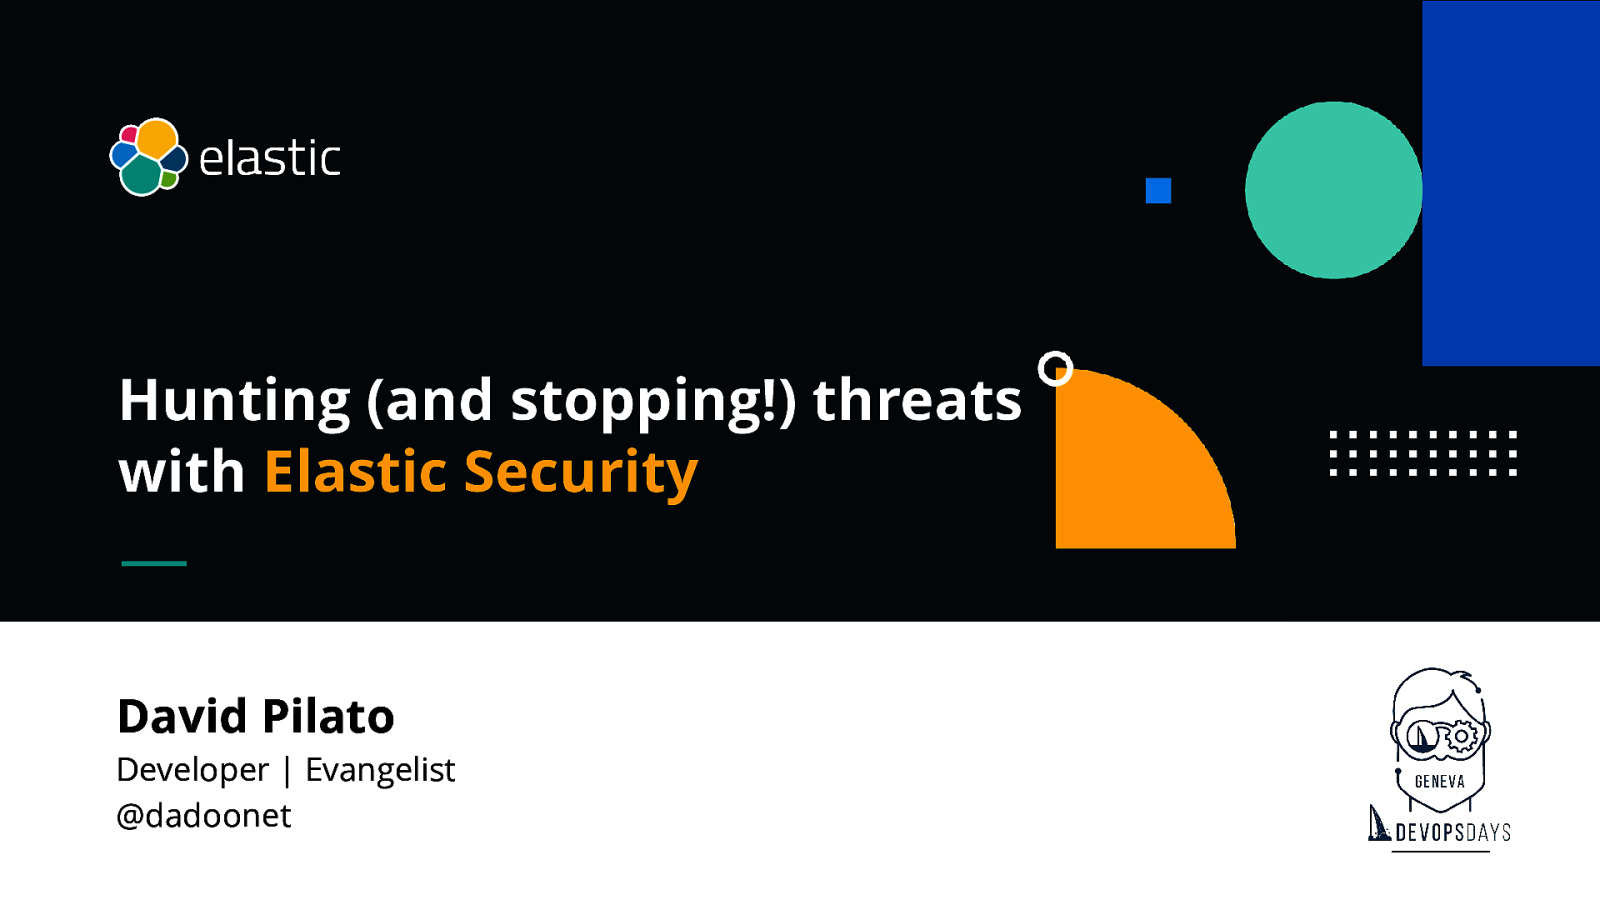 Hunting (and stopping!) threats with Elastic Security by David Pilato